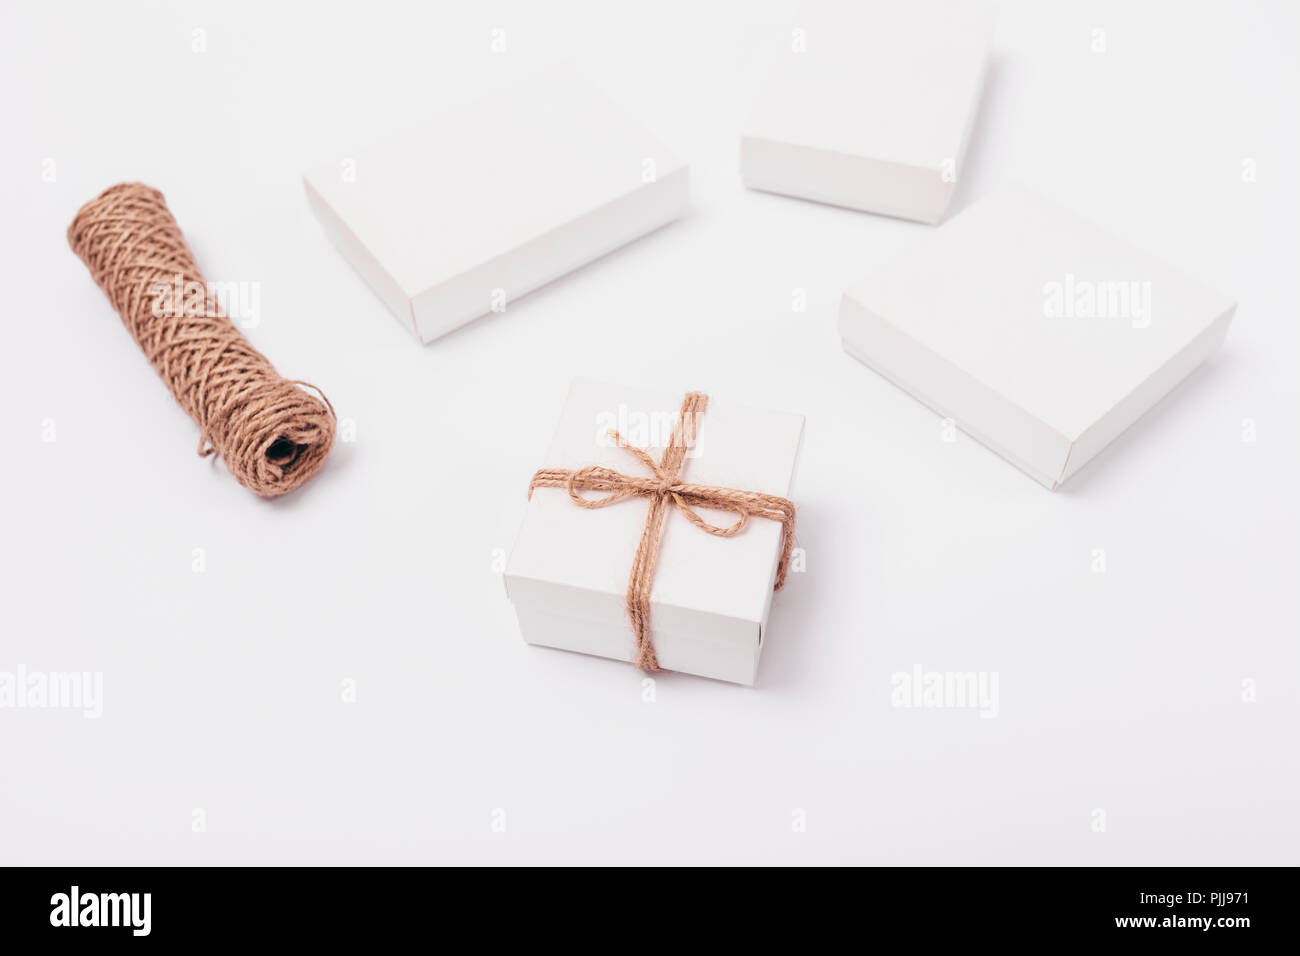 https://c8.alamy.com/comp/PJJ971/packaging-gifts-jute-rope-minimalistic-stylish-composition-of-small-gift-box-next-to-twine-coil-and-simple-white-presents-PJJ971.jpg